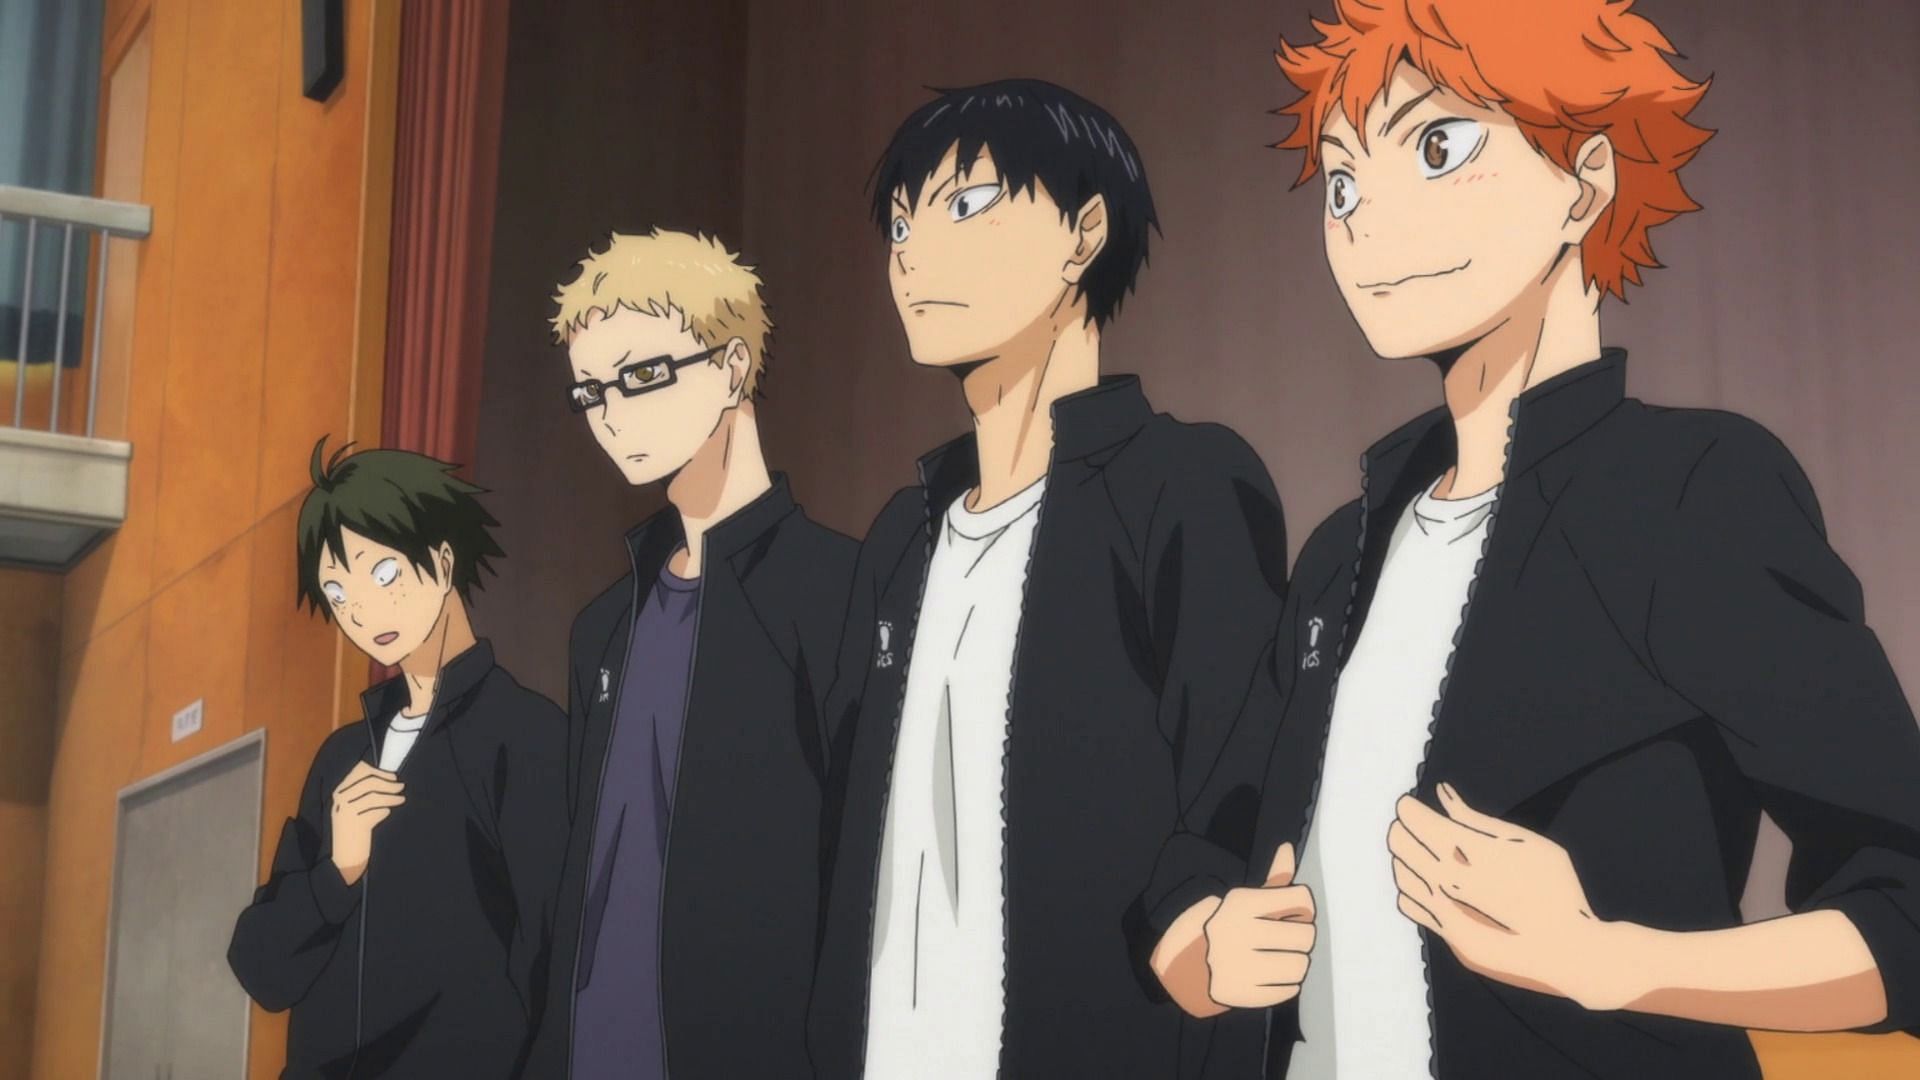 The first years as seen in Haikyuu!! (Image via Production I.G)